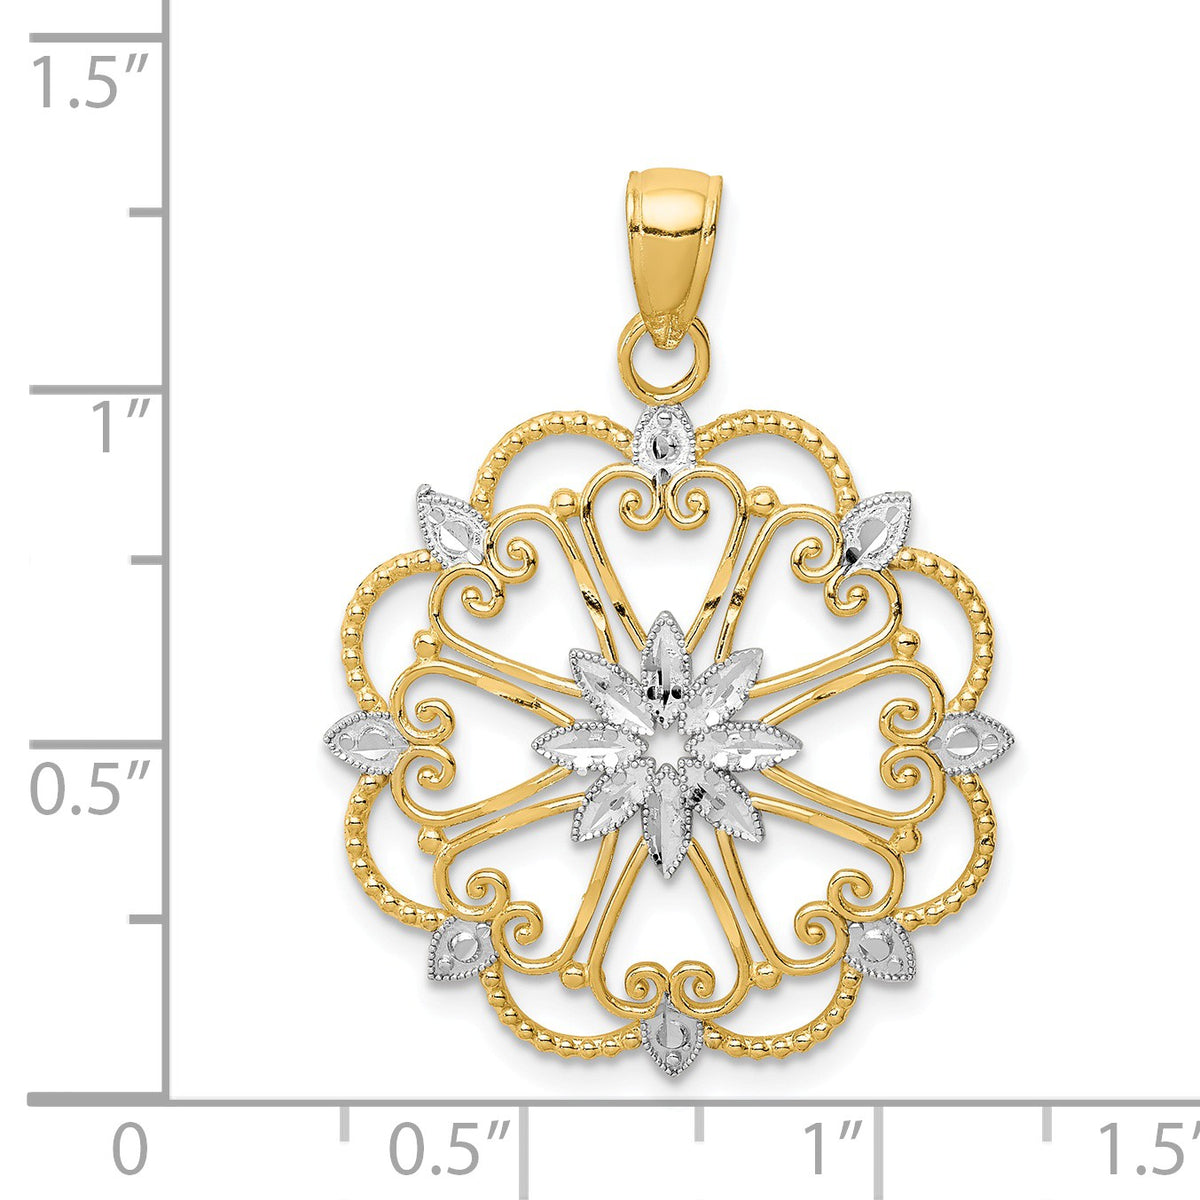 Alternate view of the 14k Yellow Gold &amp; White Rhodium Starburst Heart Pendant, 25mm (1 inch) by The Black Bow Jewelry Co.